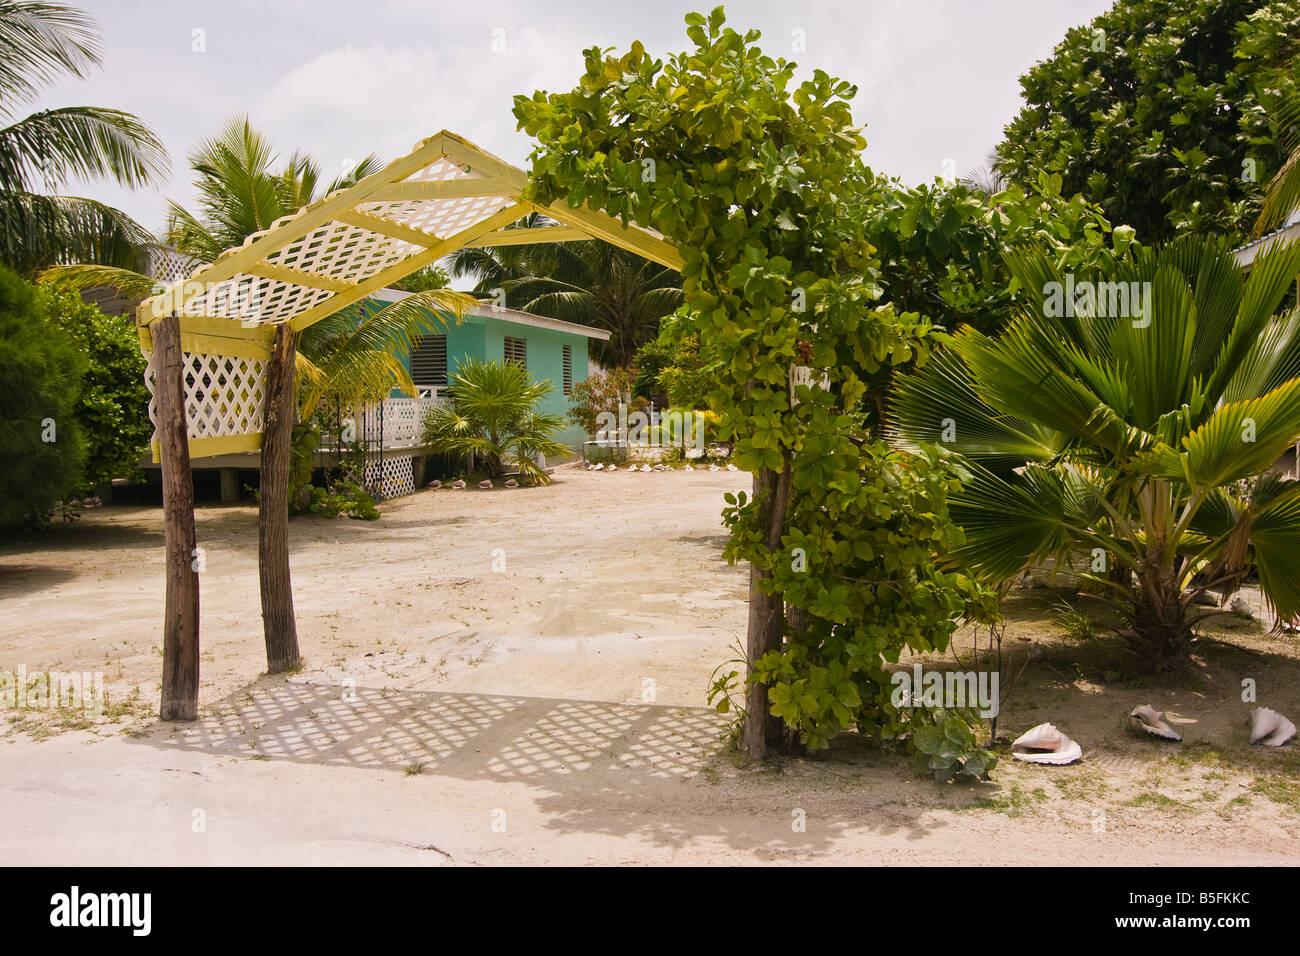 CAYE CAULKER BELIZE Gate in front of house Stock Photo